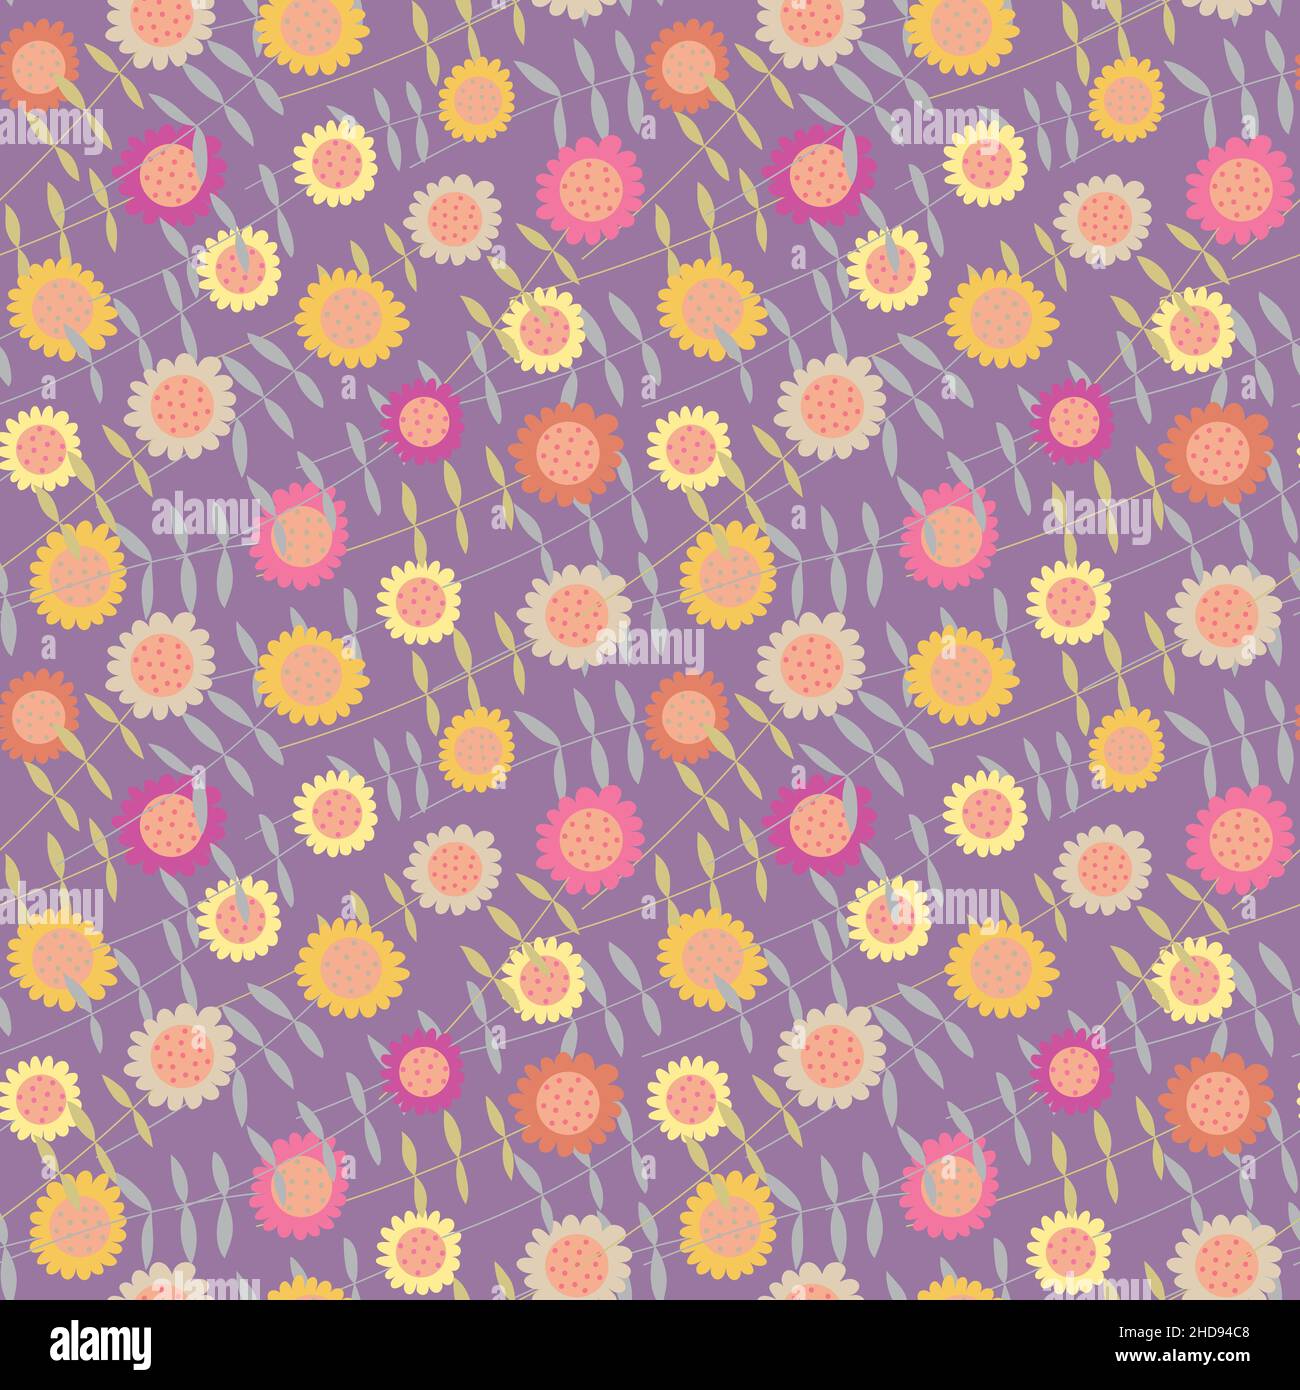 Floral pattern with pink and yellow flowers on purple background. Seamless Ditsy print. Stock Vector